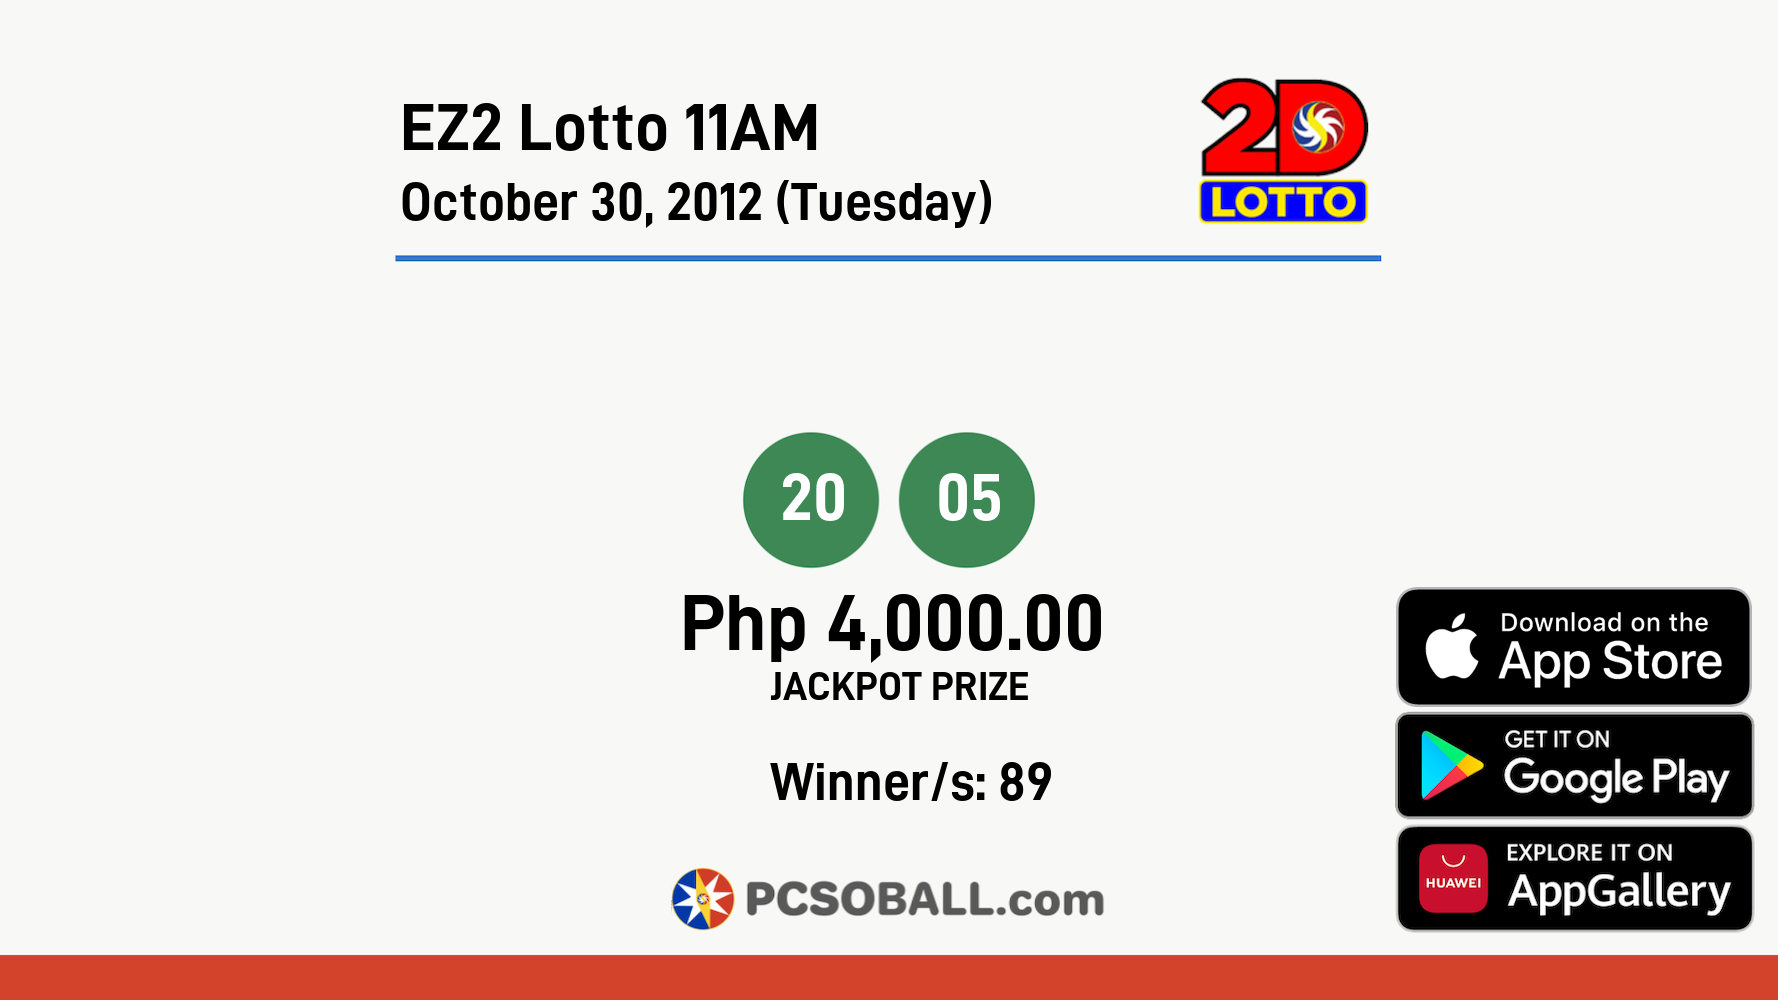 EZ2 Lotto 11AM October 30, 2012 (Tuesday) Result